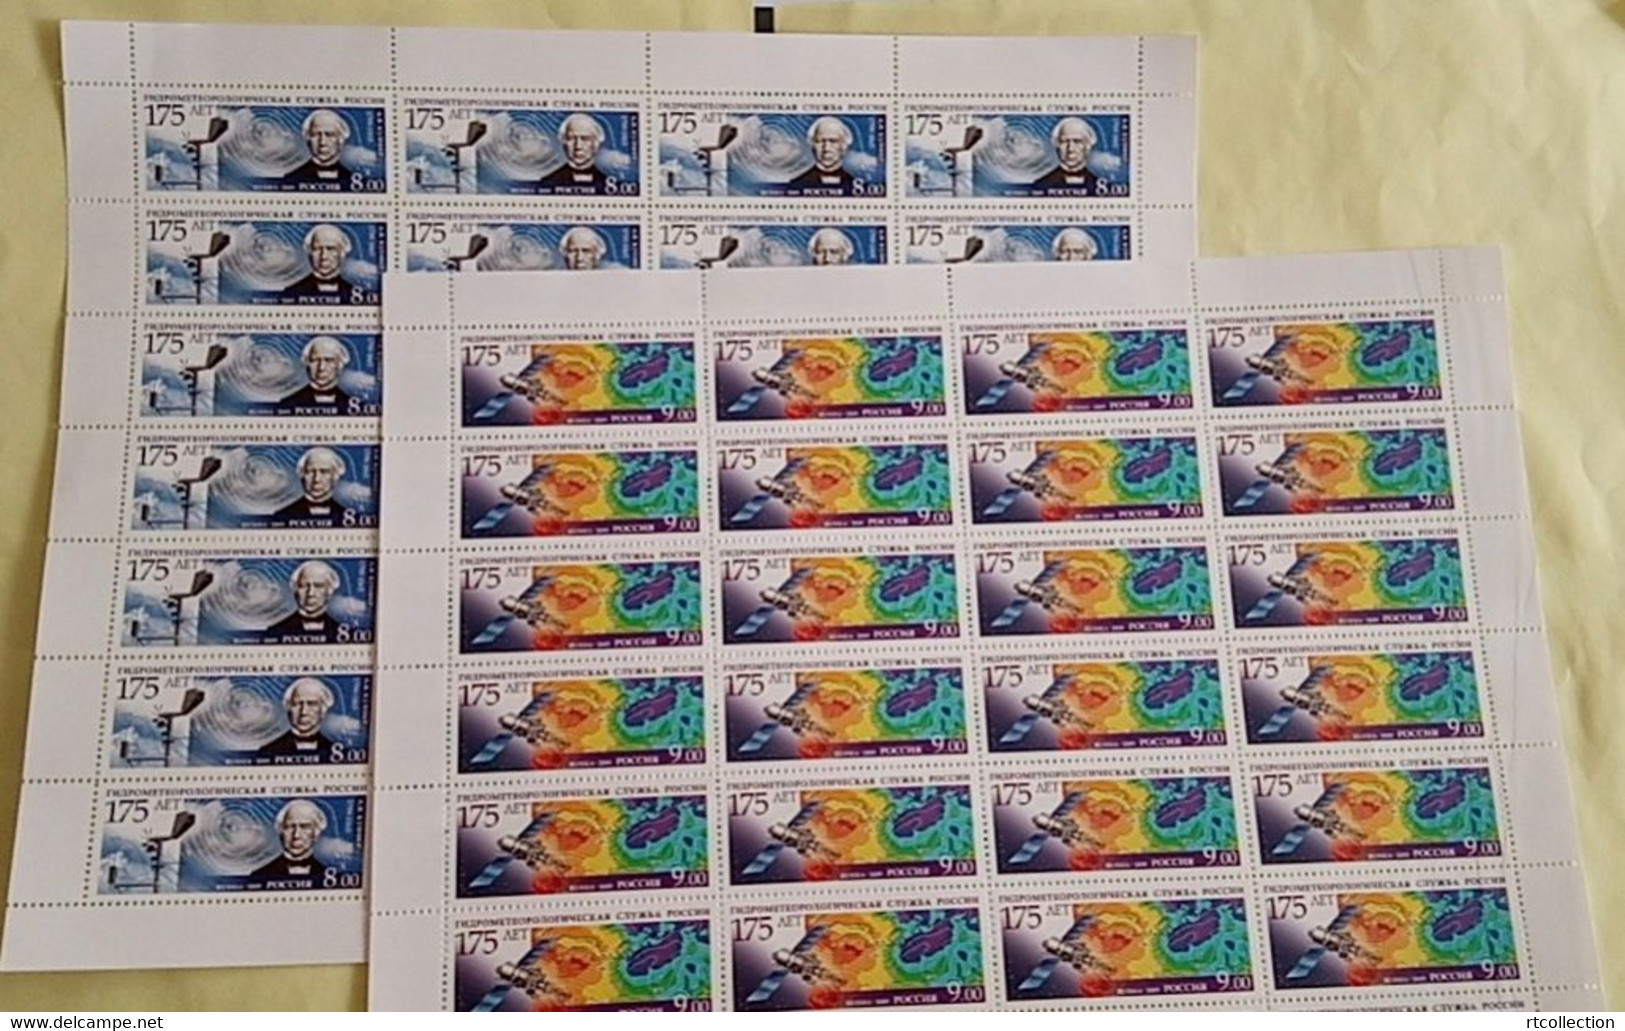 Russia 2009 Sheet 175th Anniv Hydrometeorogical Service Satellite Map Climate Space Environment Stamps FOLDED - Ganze Bögen